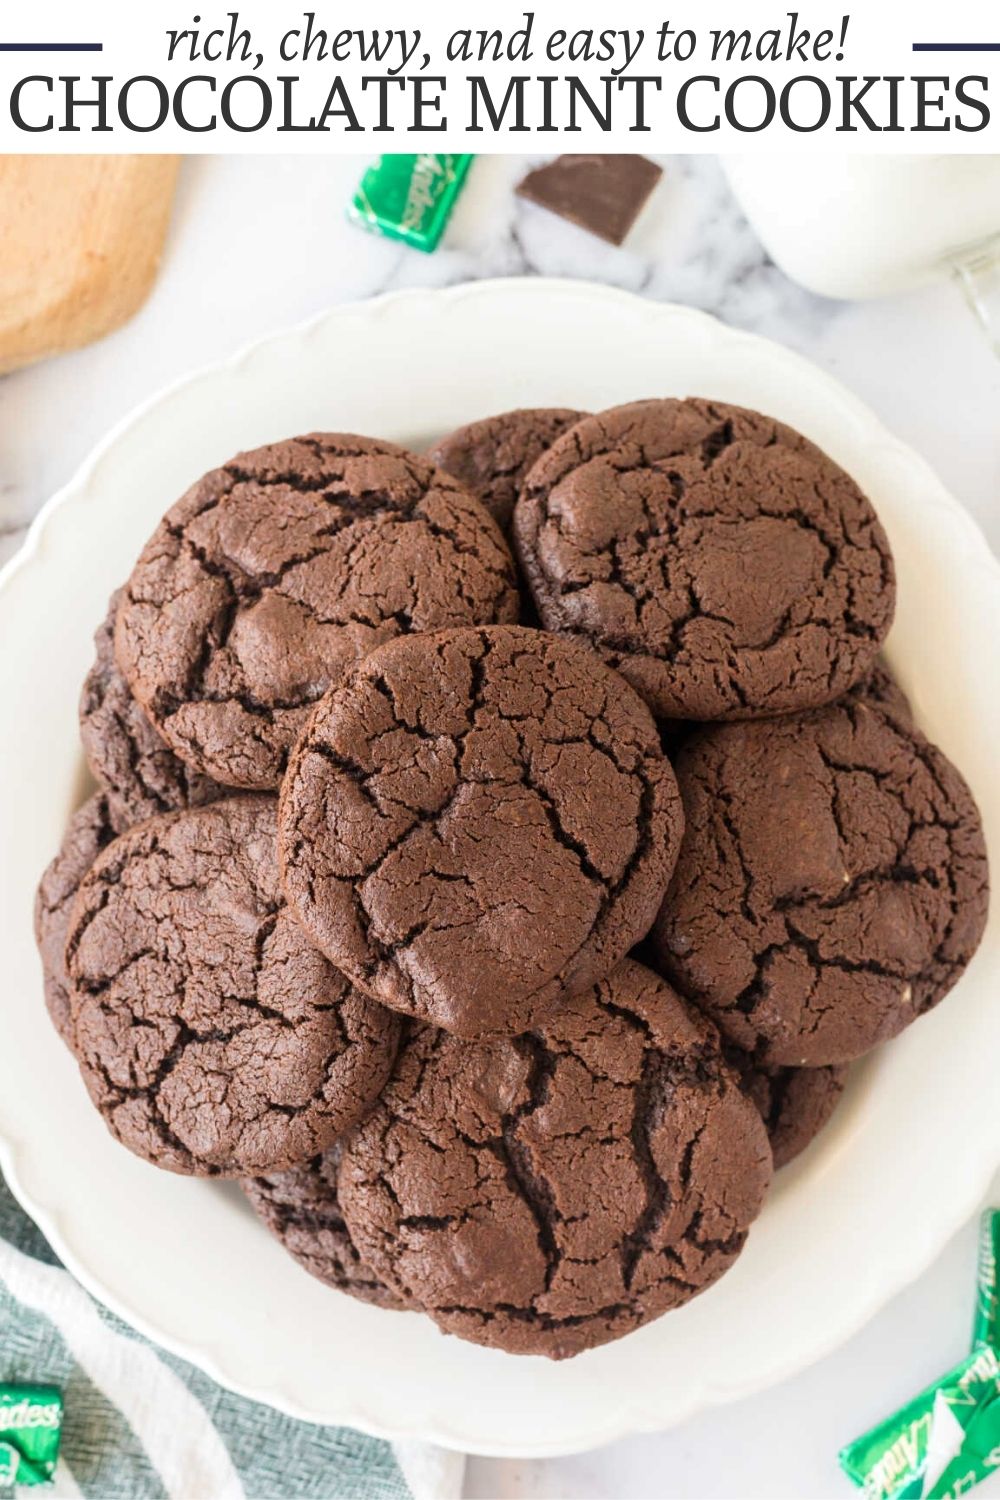 Chocolate mint cookies are packed loaded with rich chocolate flavor and bits of mint chocolate candies.  They are festive, easy and sure to please!